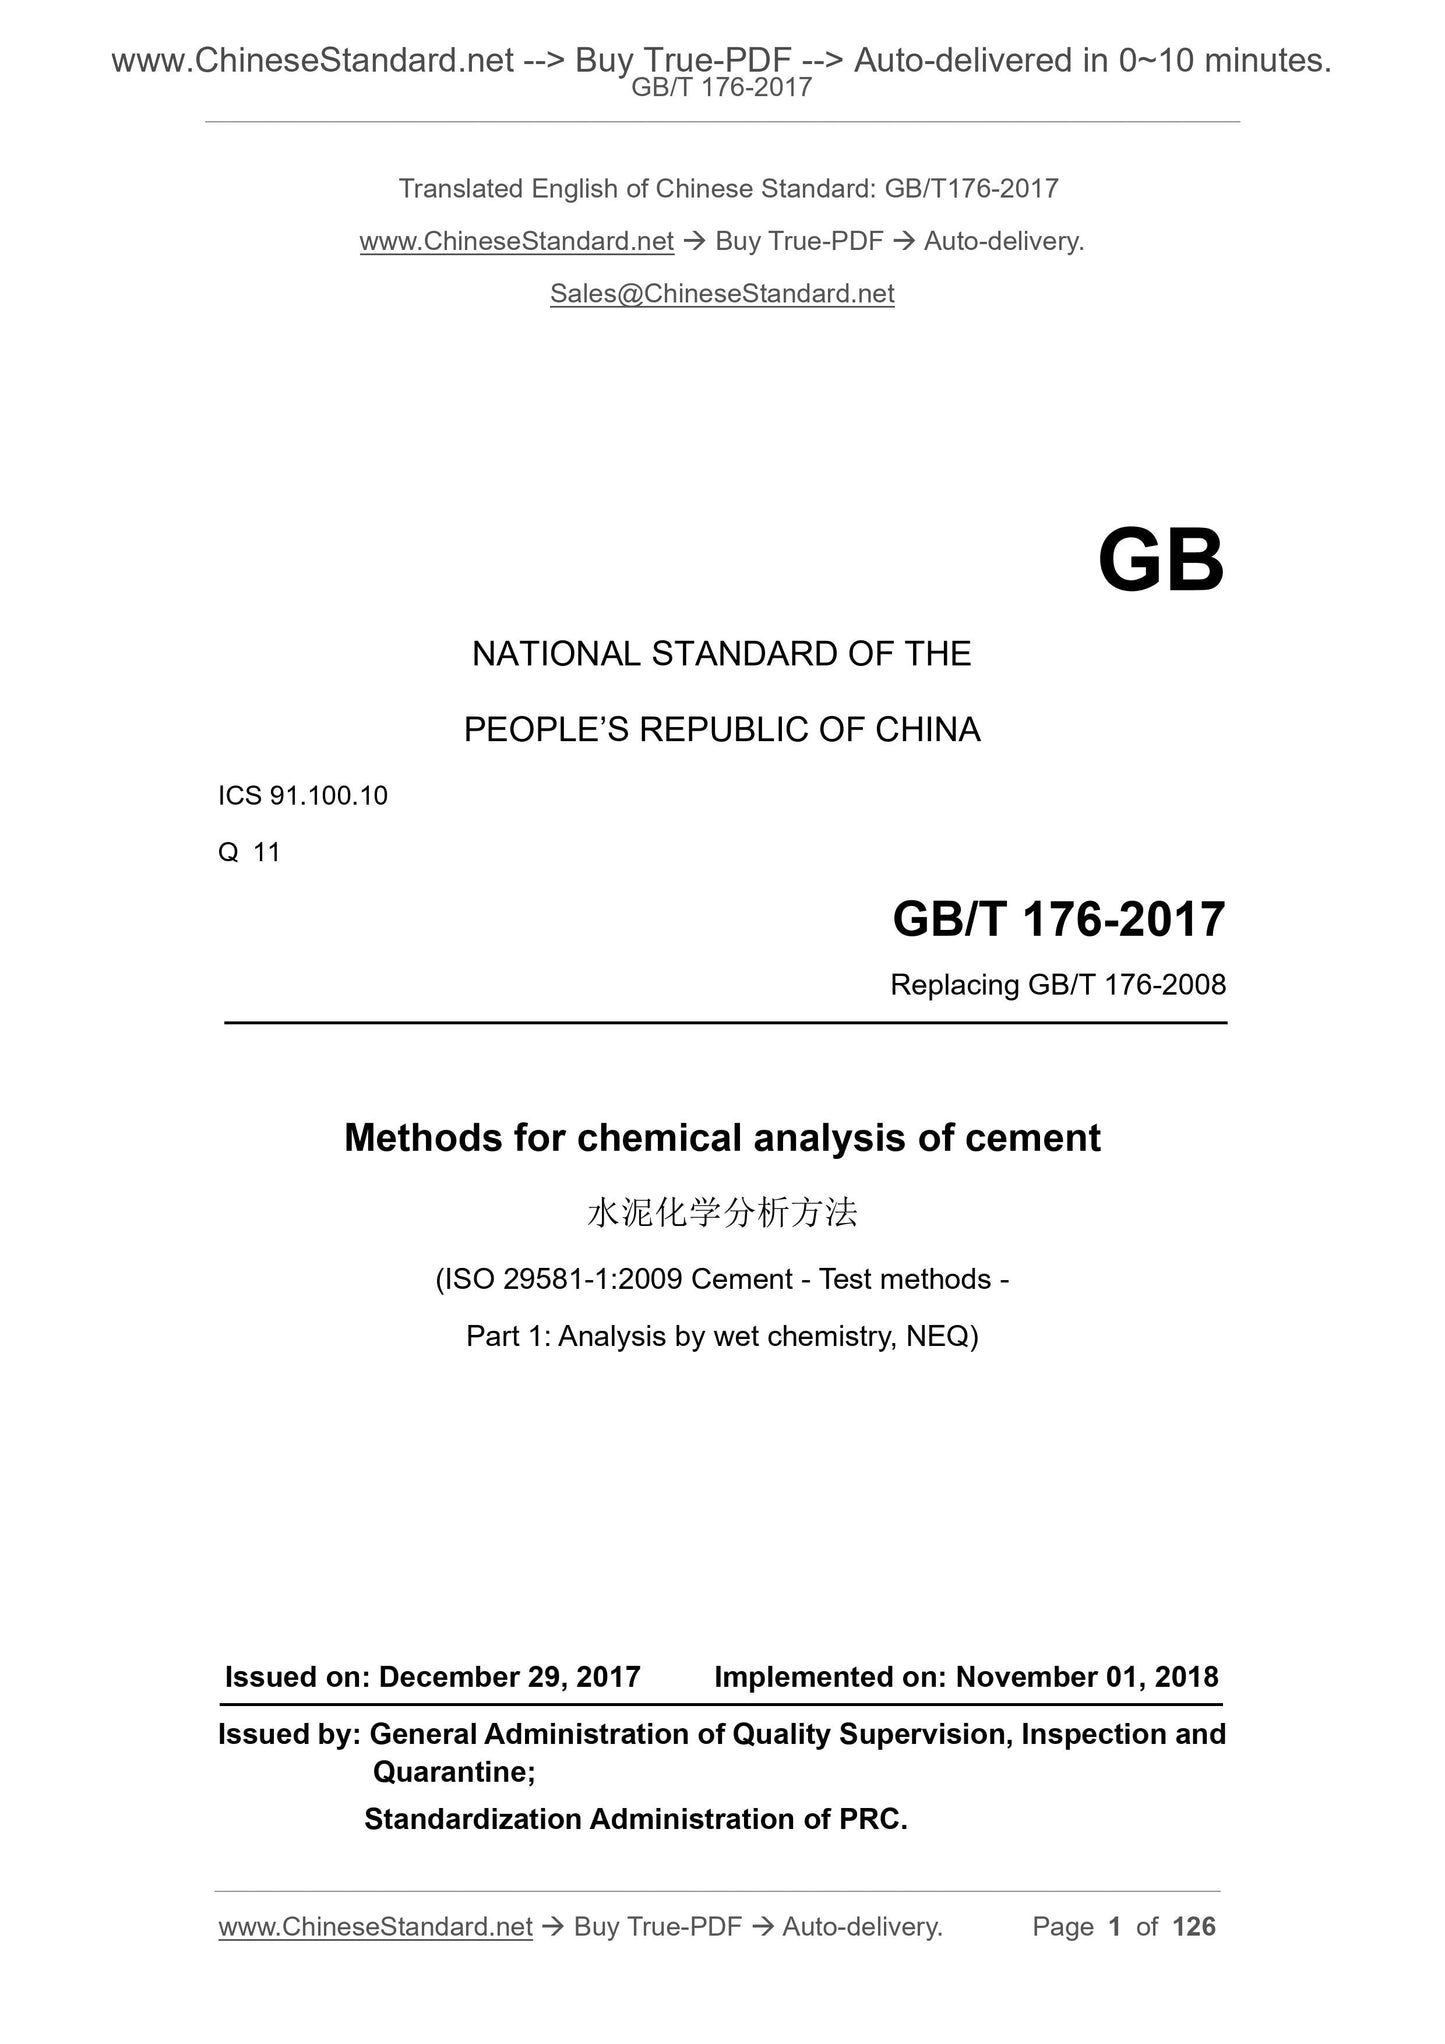 GB/T 176-2017 Page 1